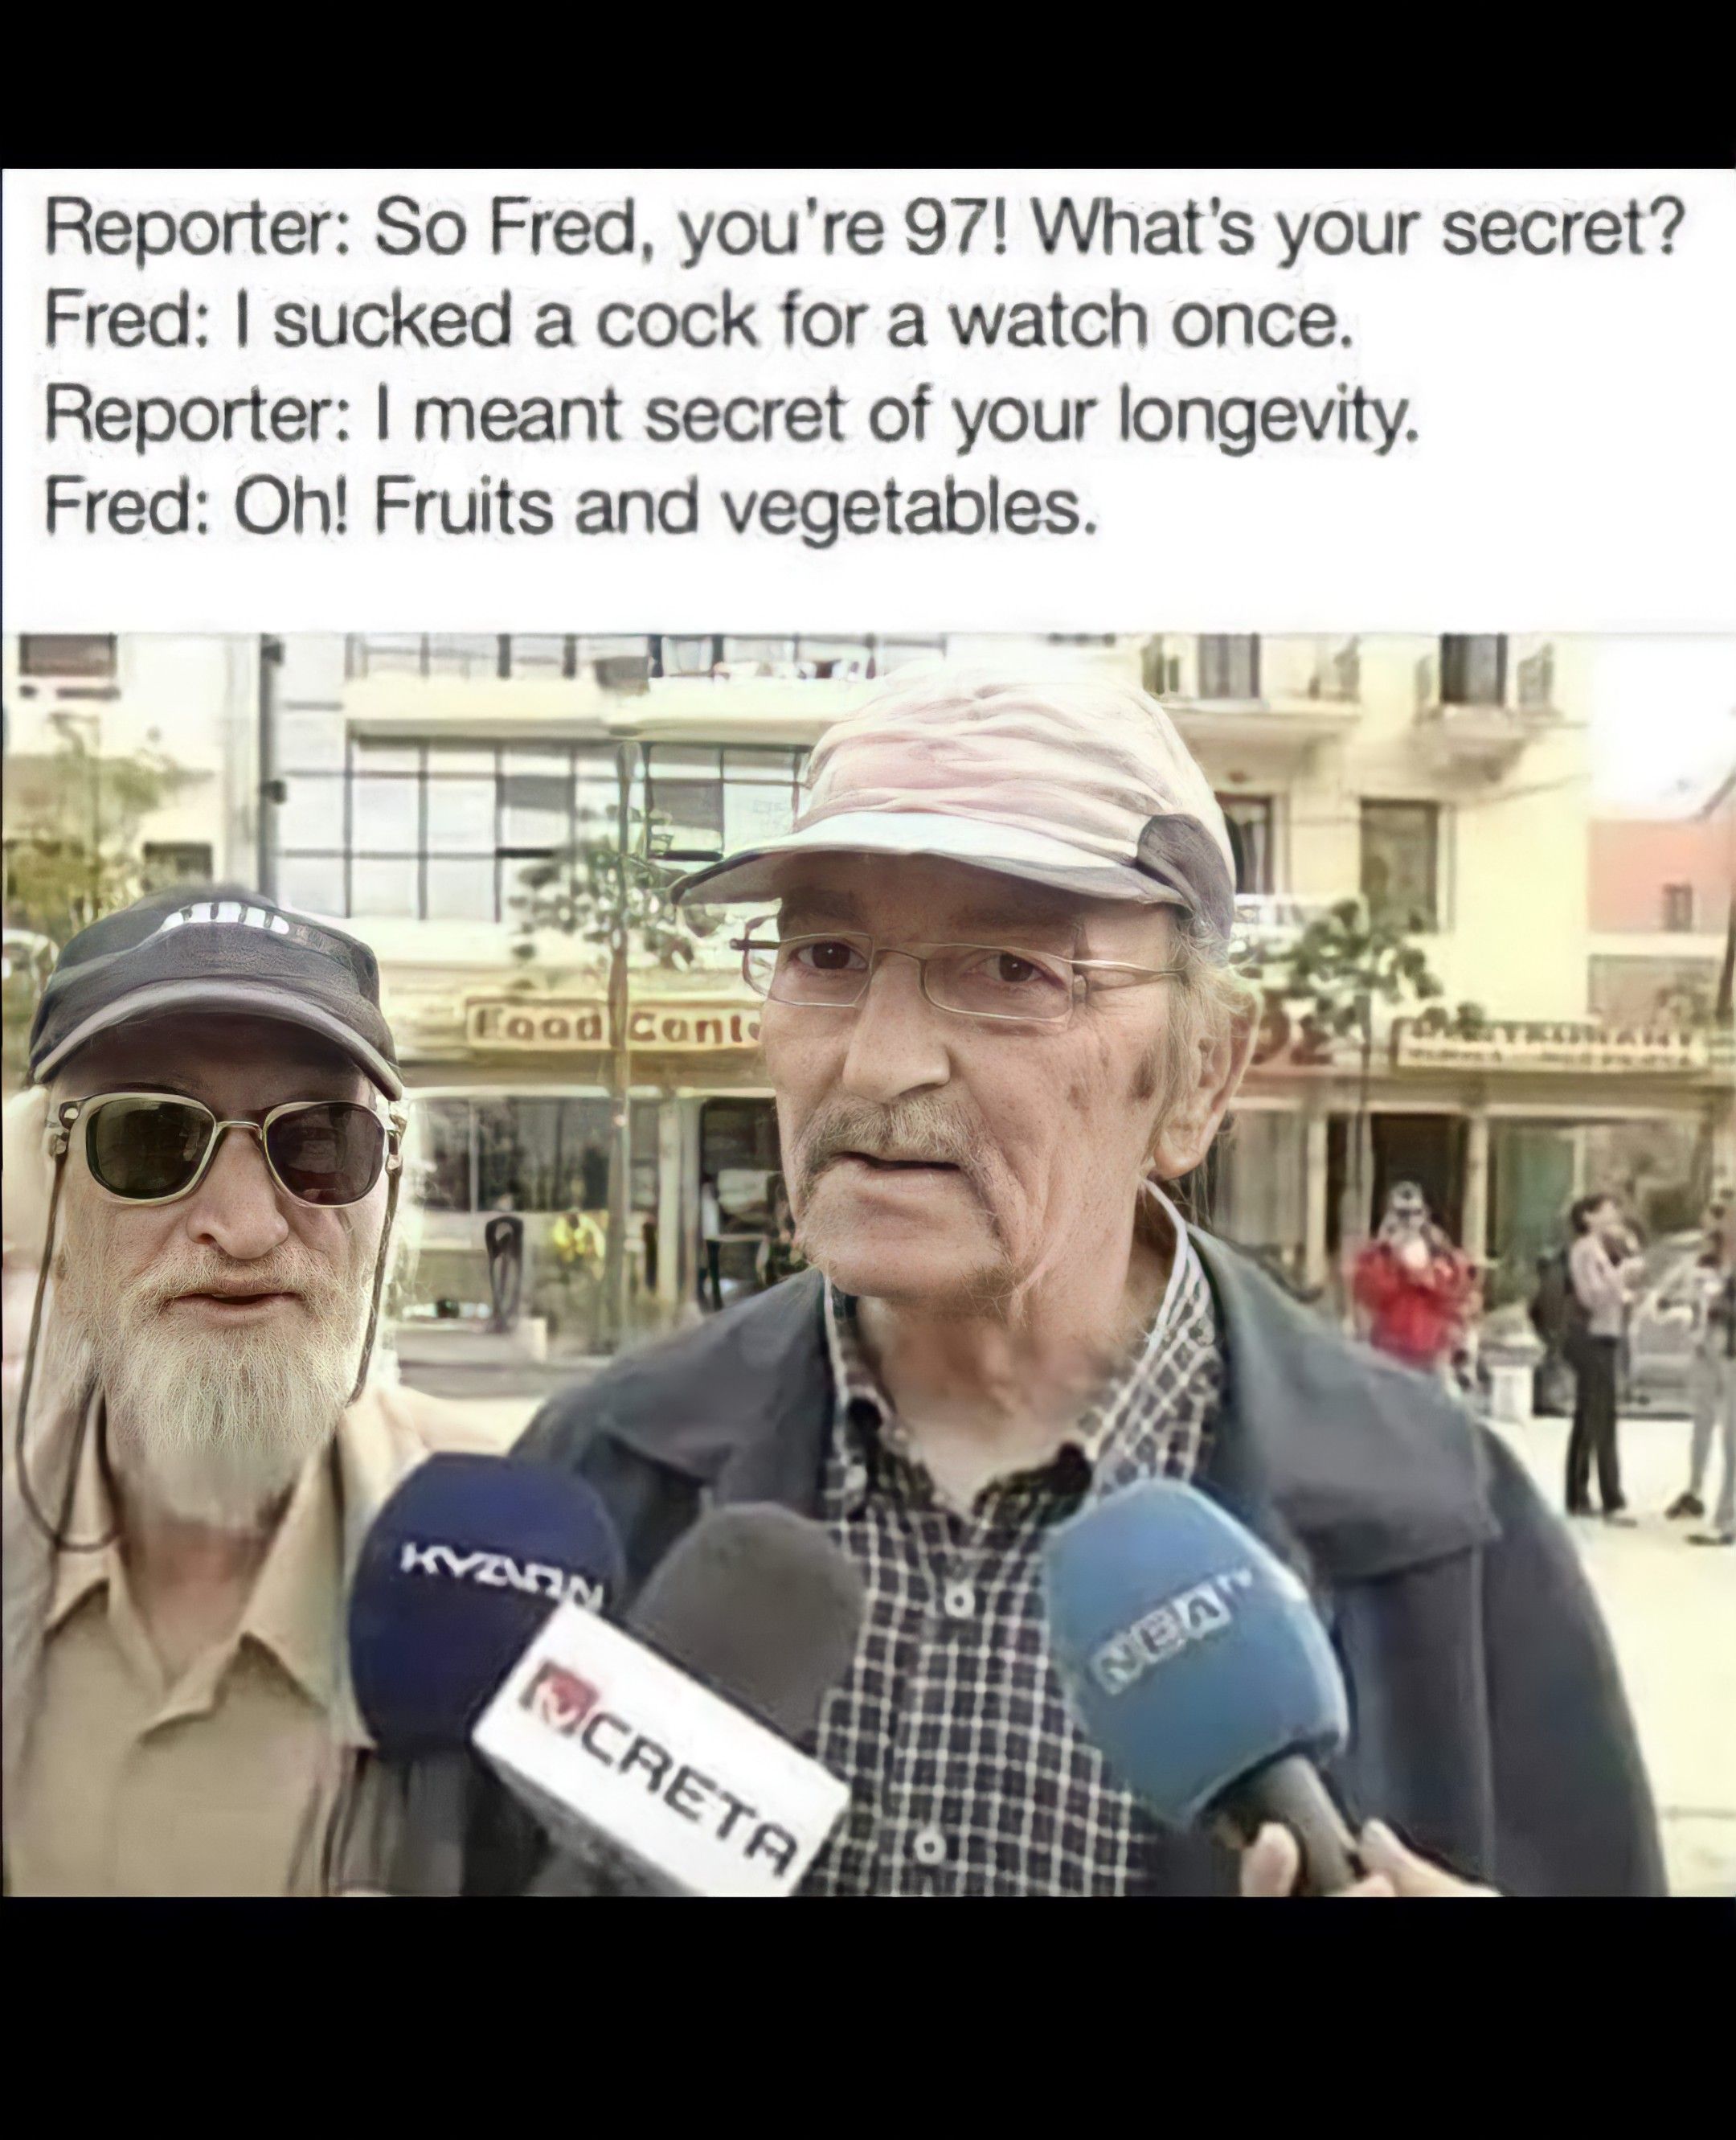 Oh! Fruits and vegetables